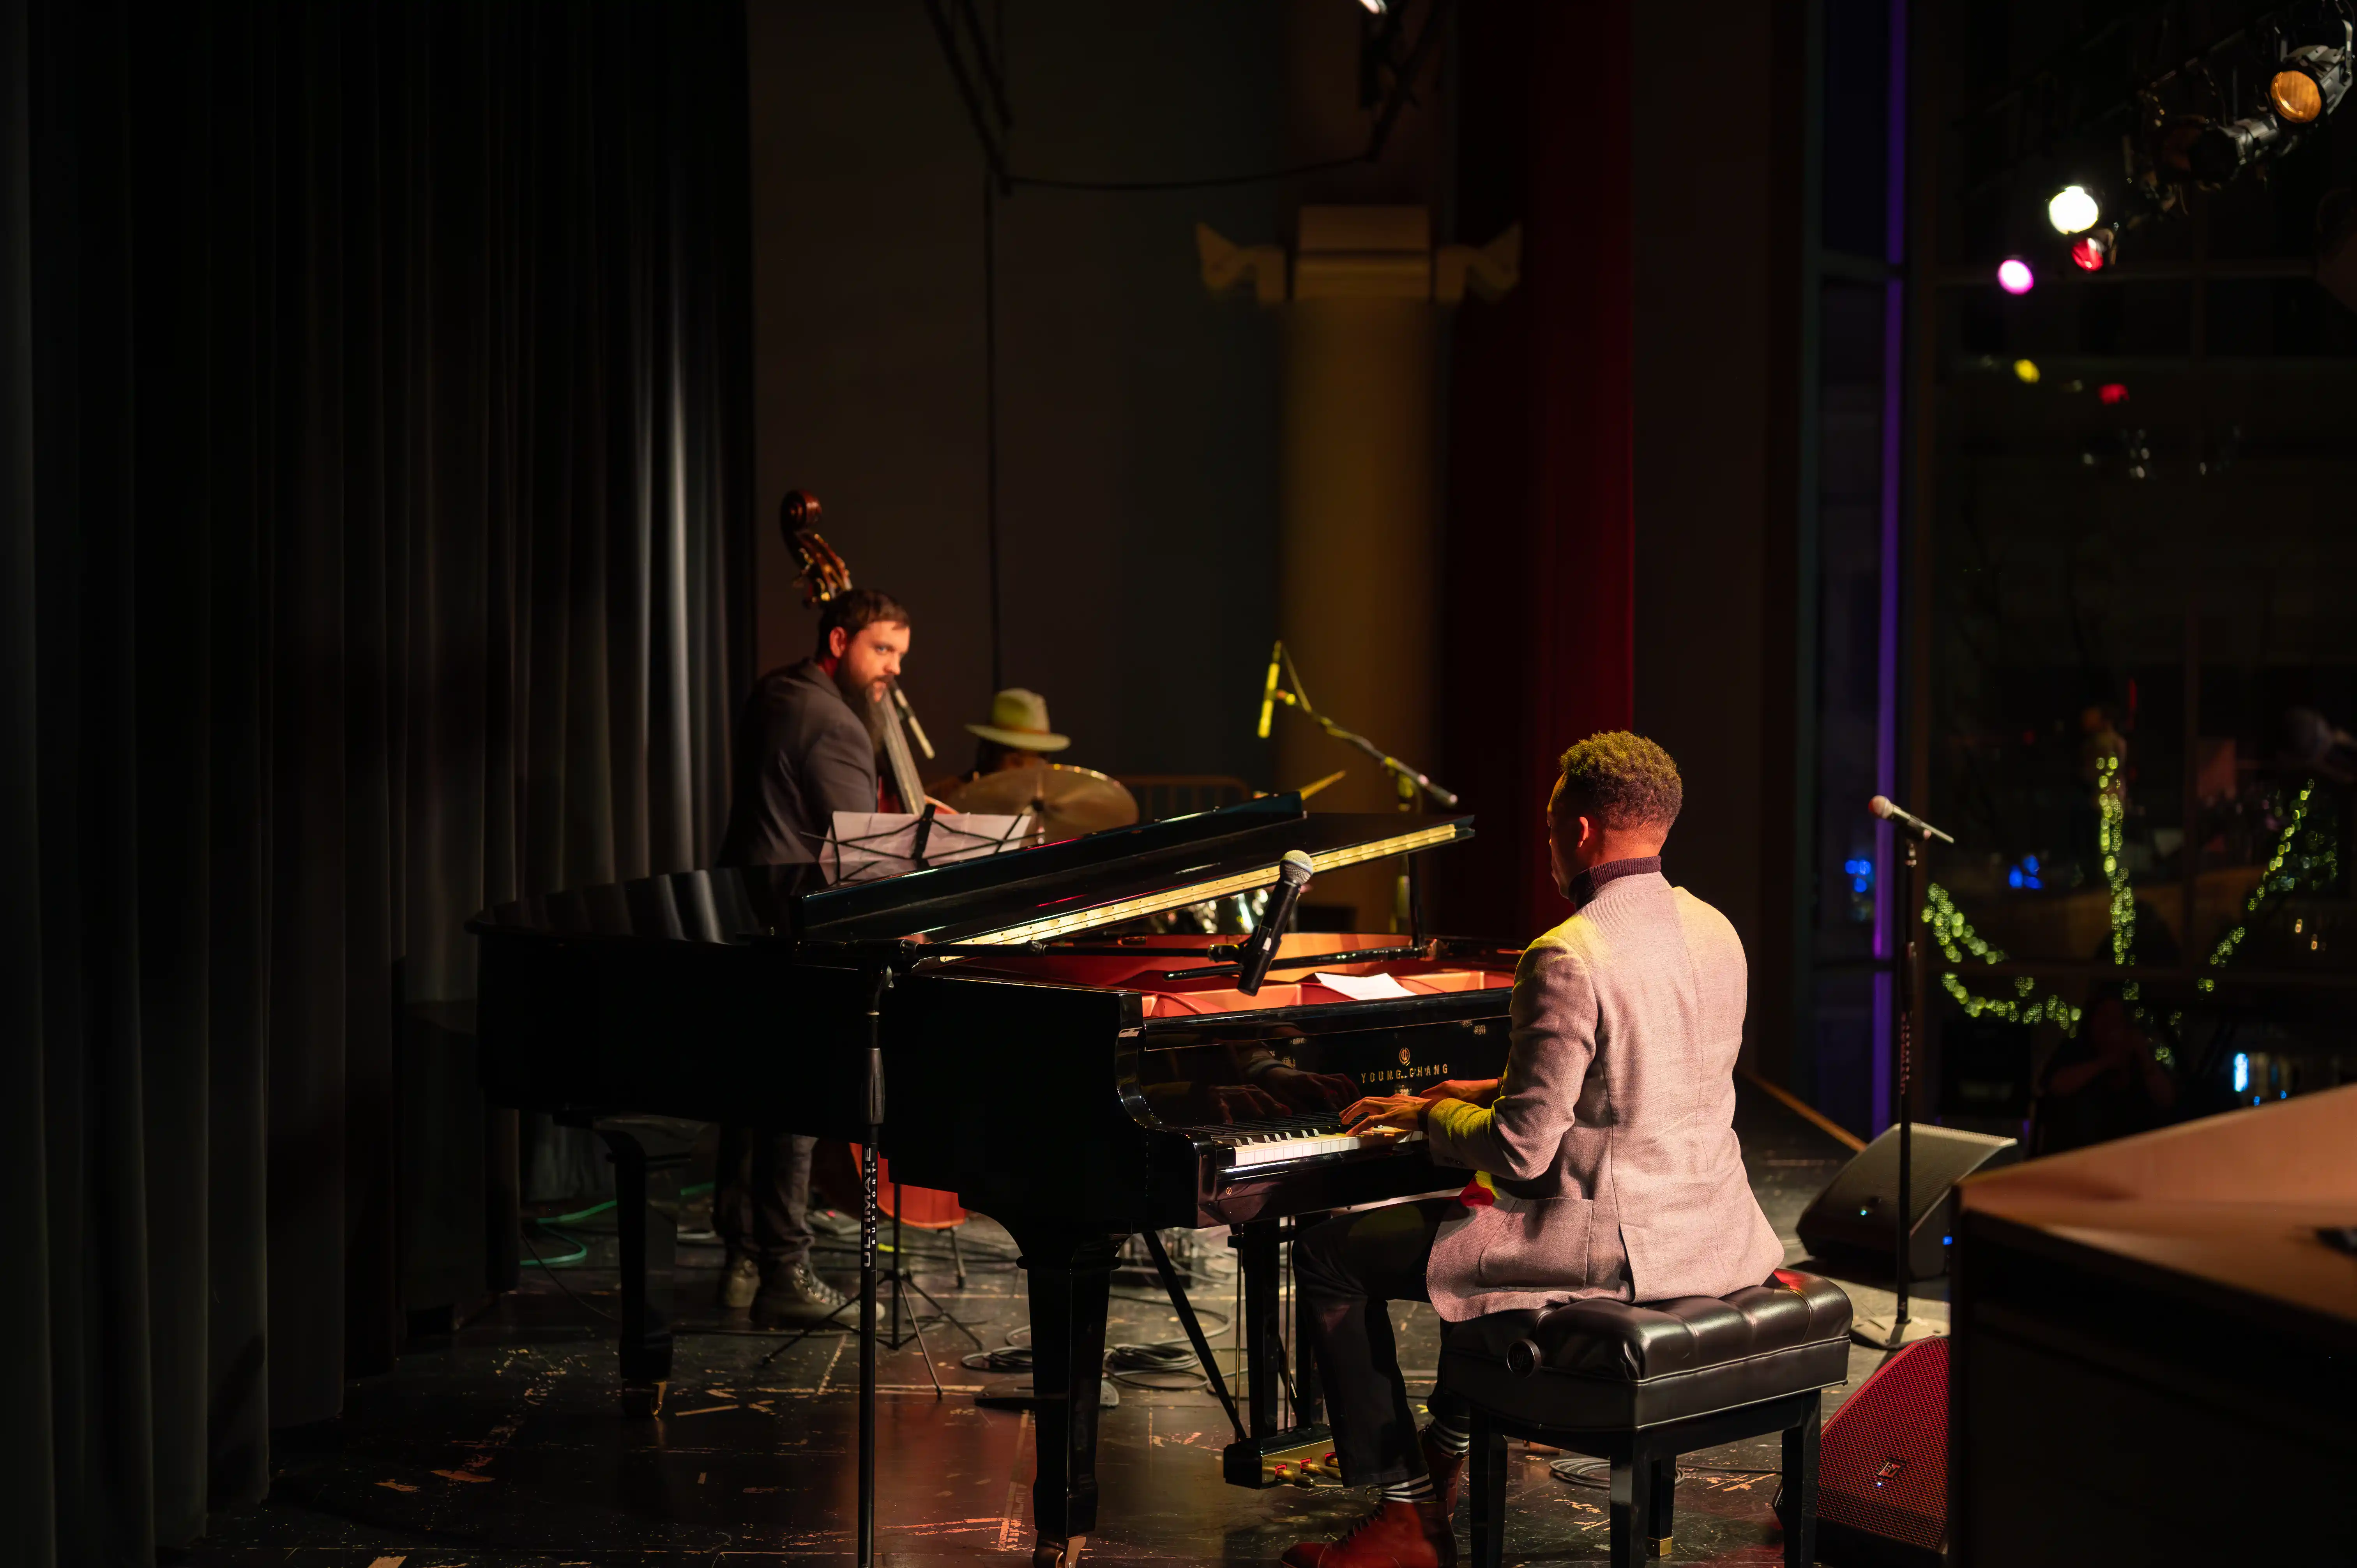 Musicians performing on stage with a pianist playing a grand piano and another musician on a keyboard.